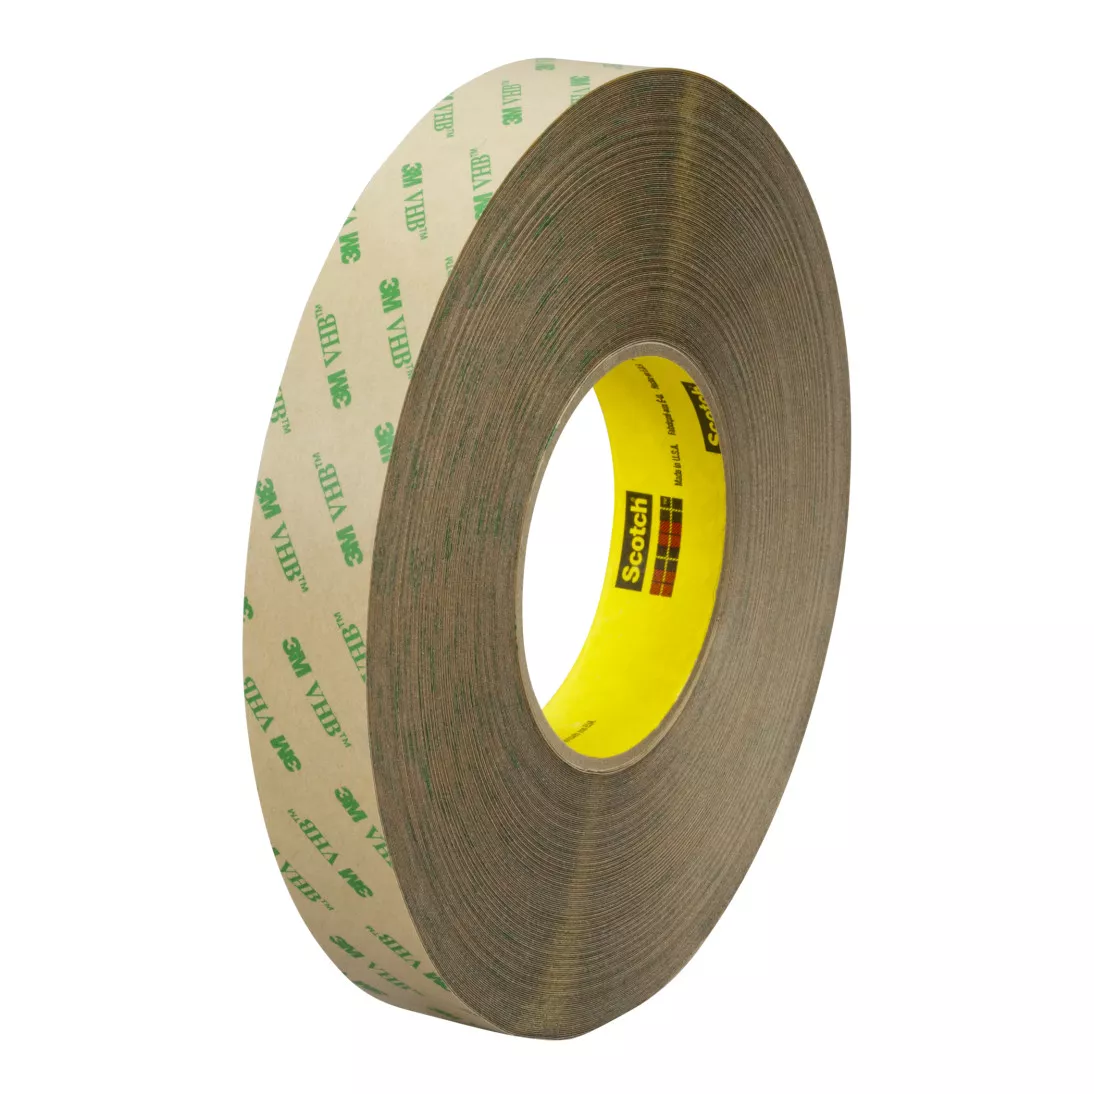 3M™ Adhesive Transfer Tape 9473PC, Clear, 24 in x 60 yd, 10 mil, 1 roll
per case